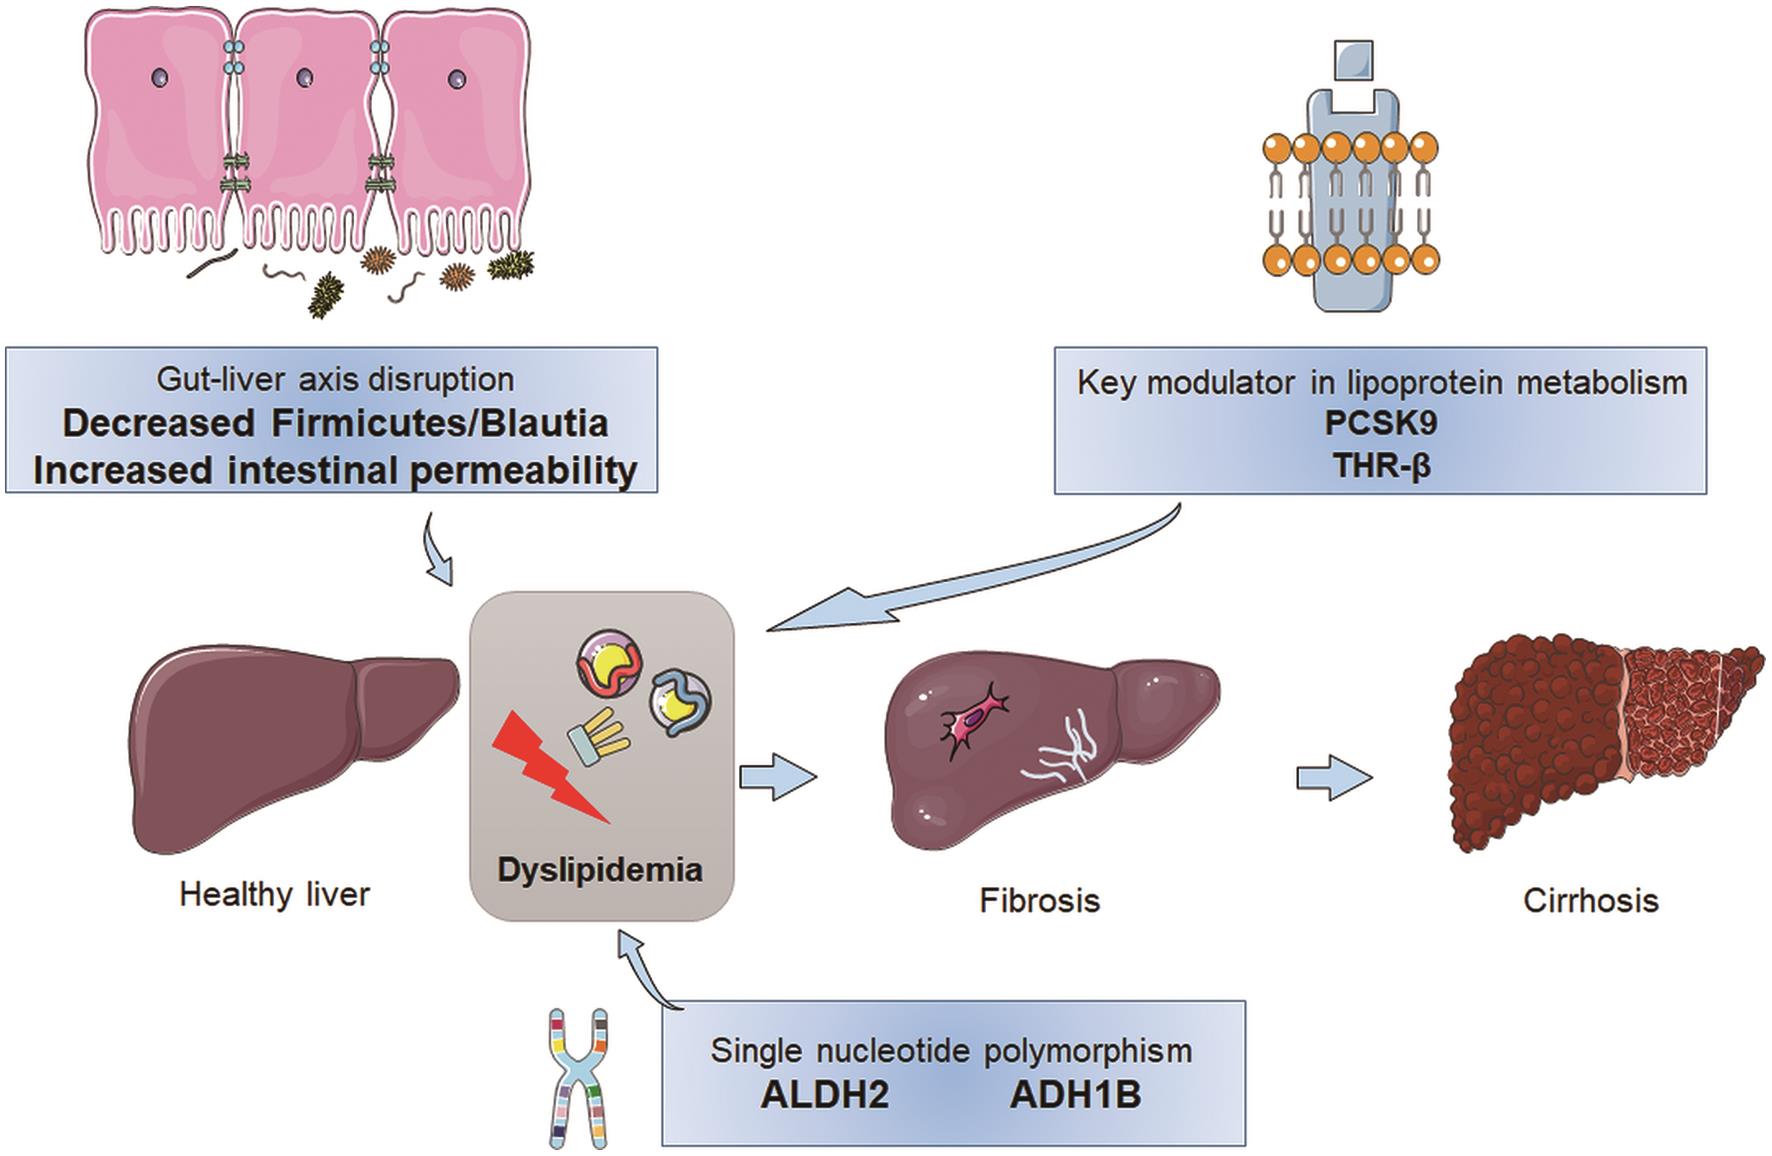 The underlying mechanism pertaining to lipid changes in cirrhosis appears to be complicated.